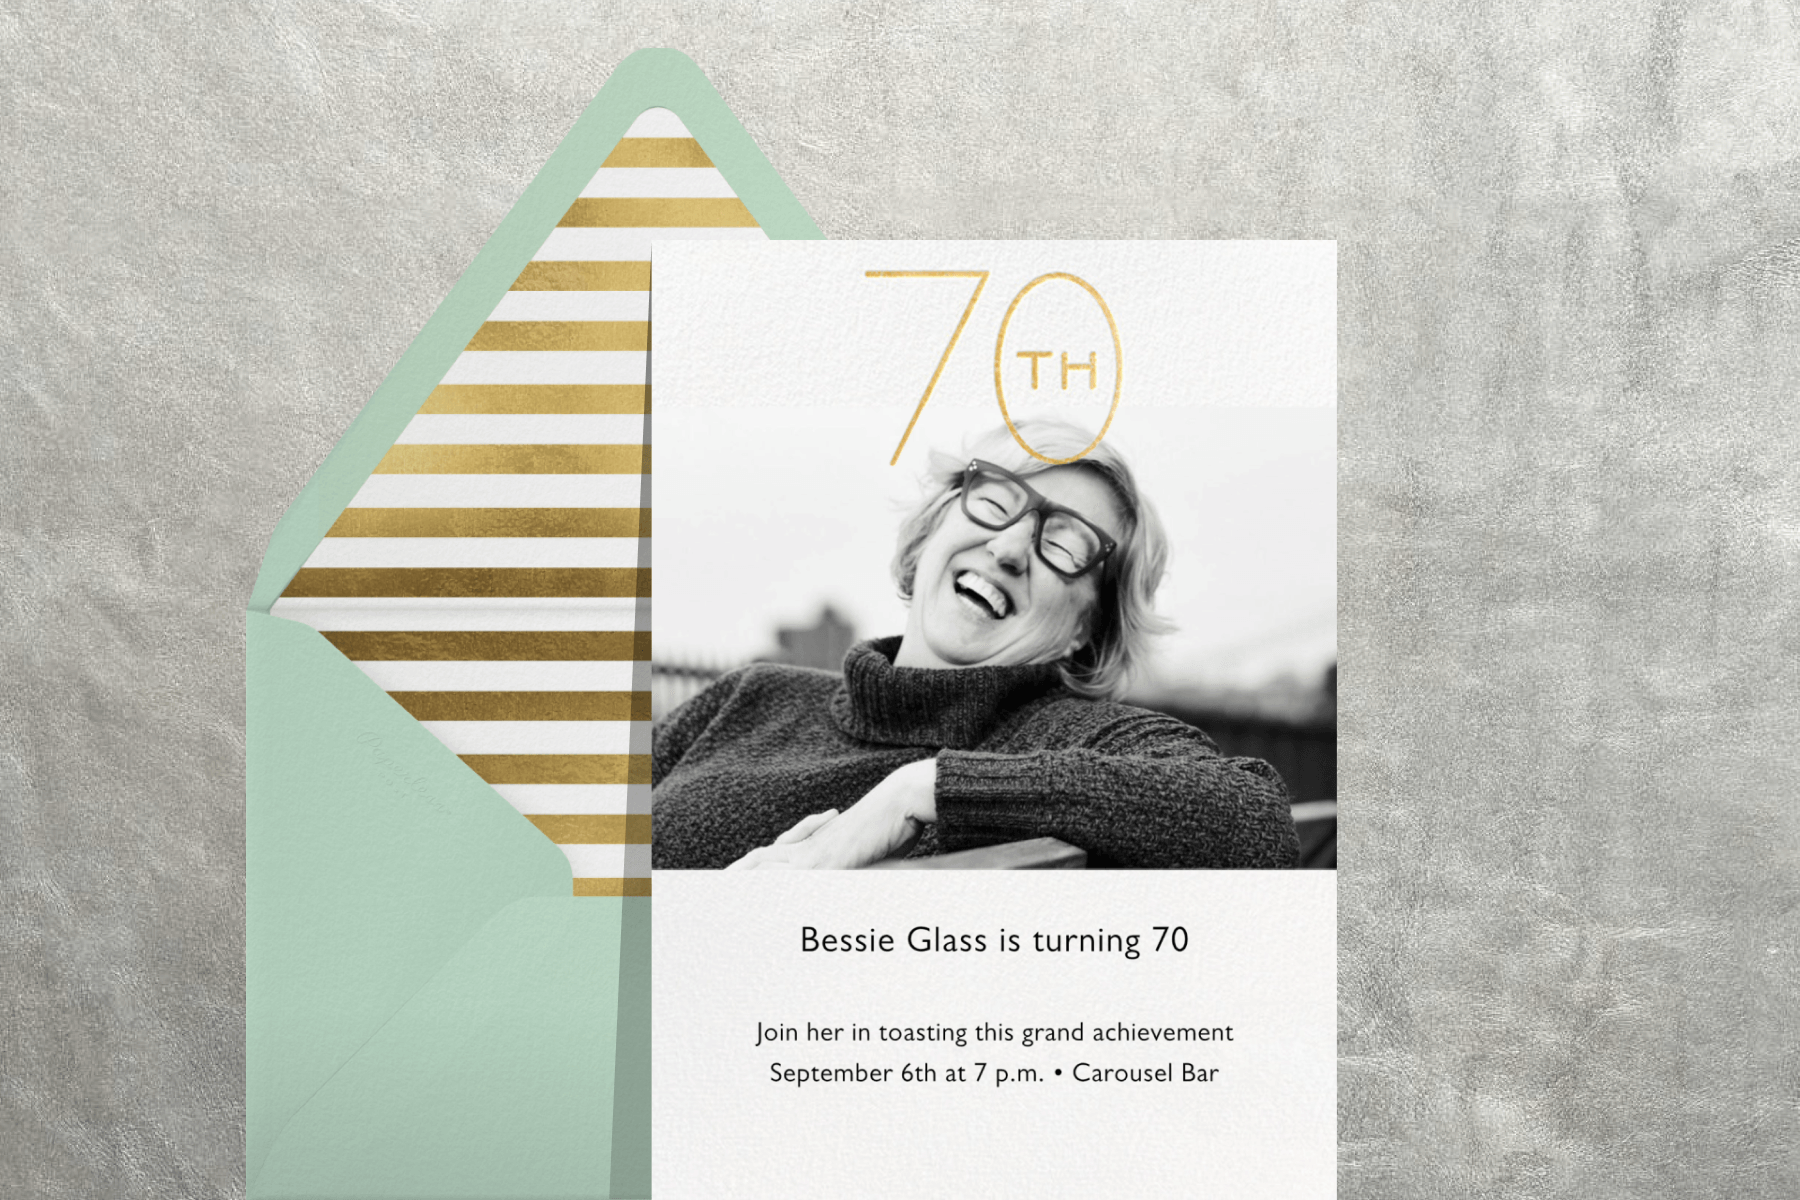 70th birthday invitation with a black and white photo of a woman